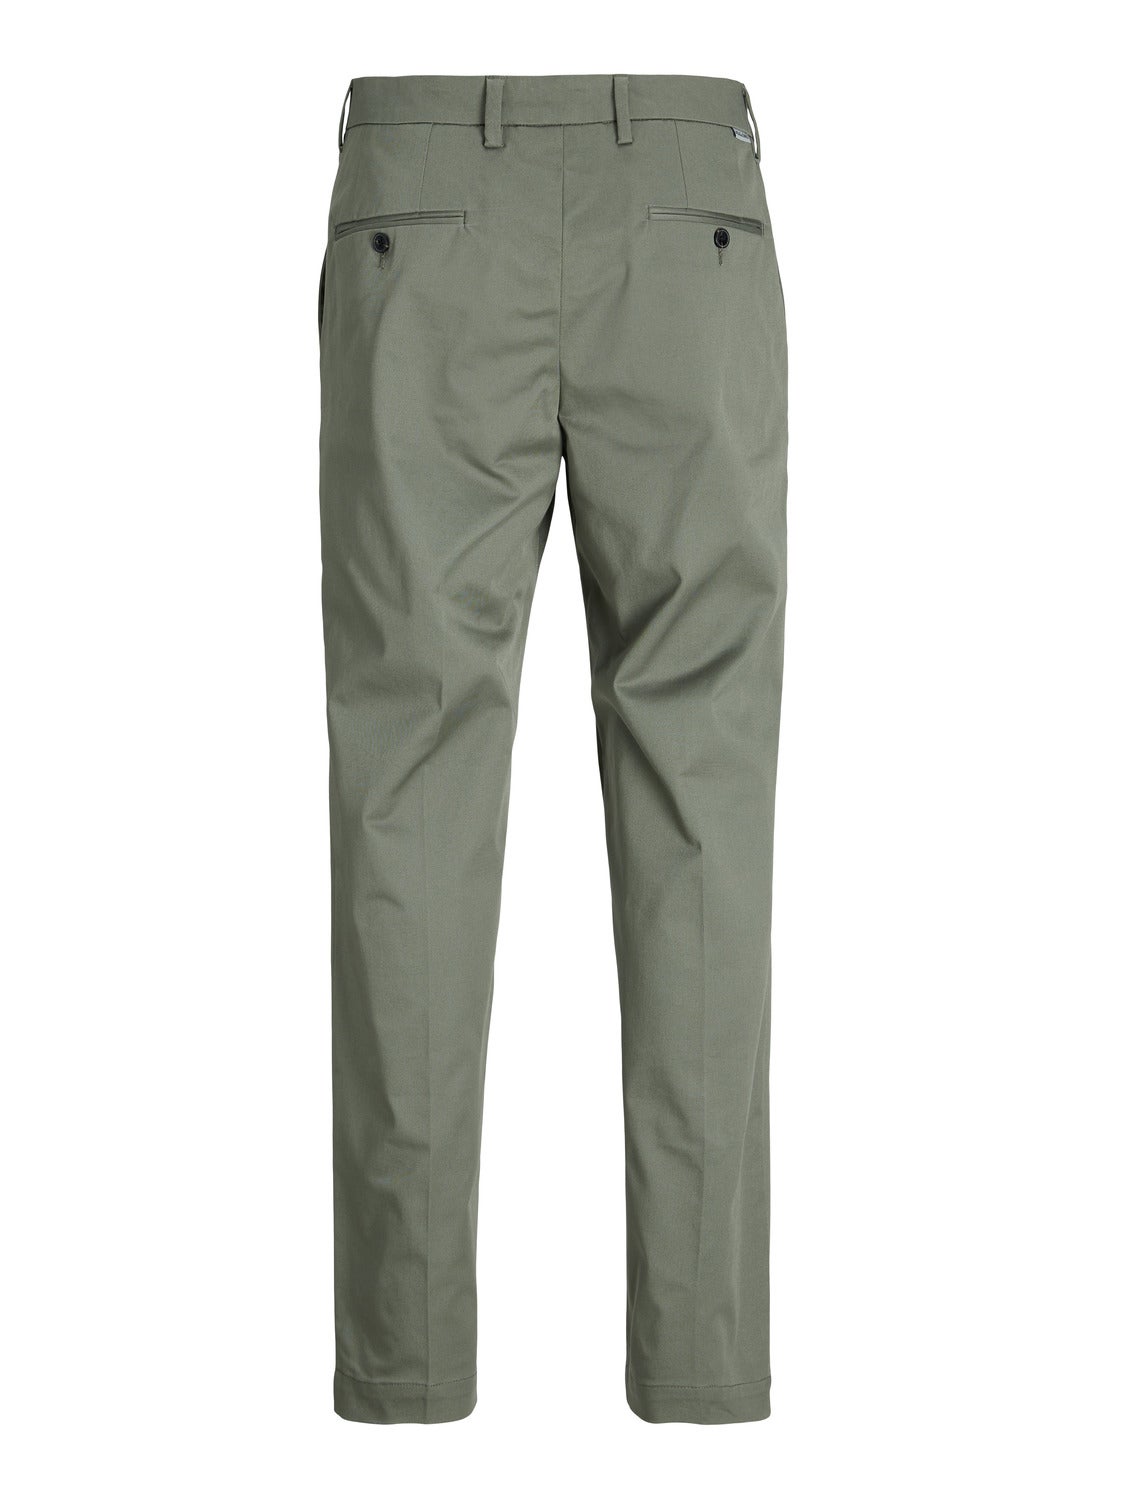 Polo Ralph Lauren Men's Relaxed Fit Classic Chino Pants - Macy's